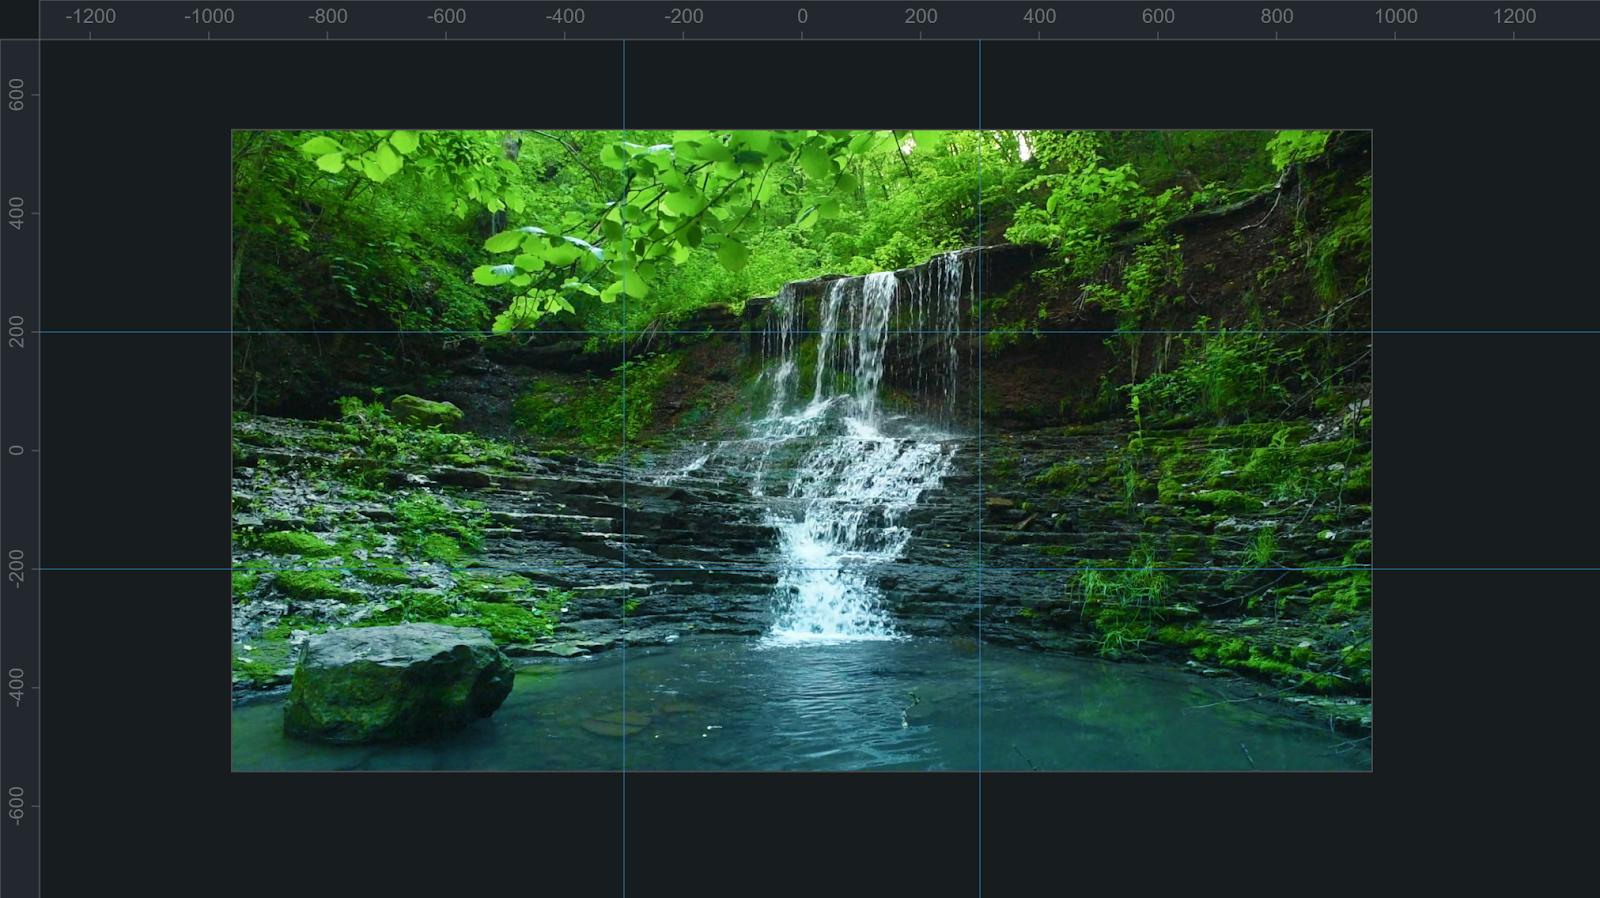 Peaceful landscape with waterfall and grid lines over it.